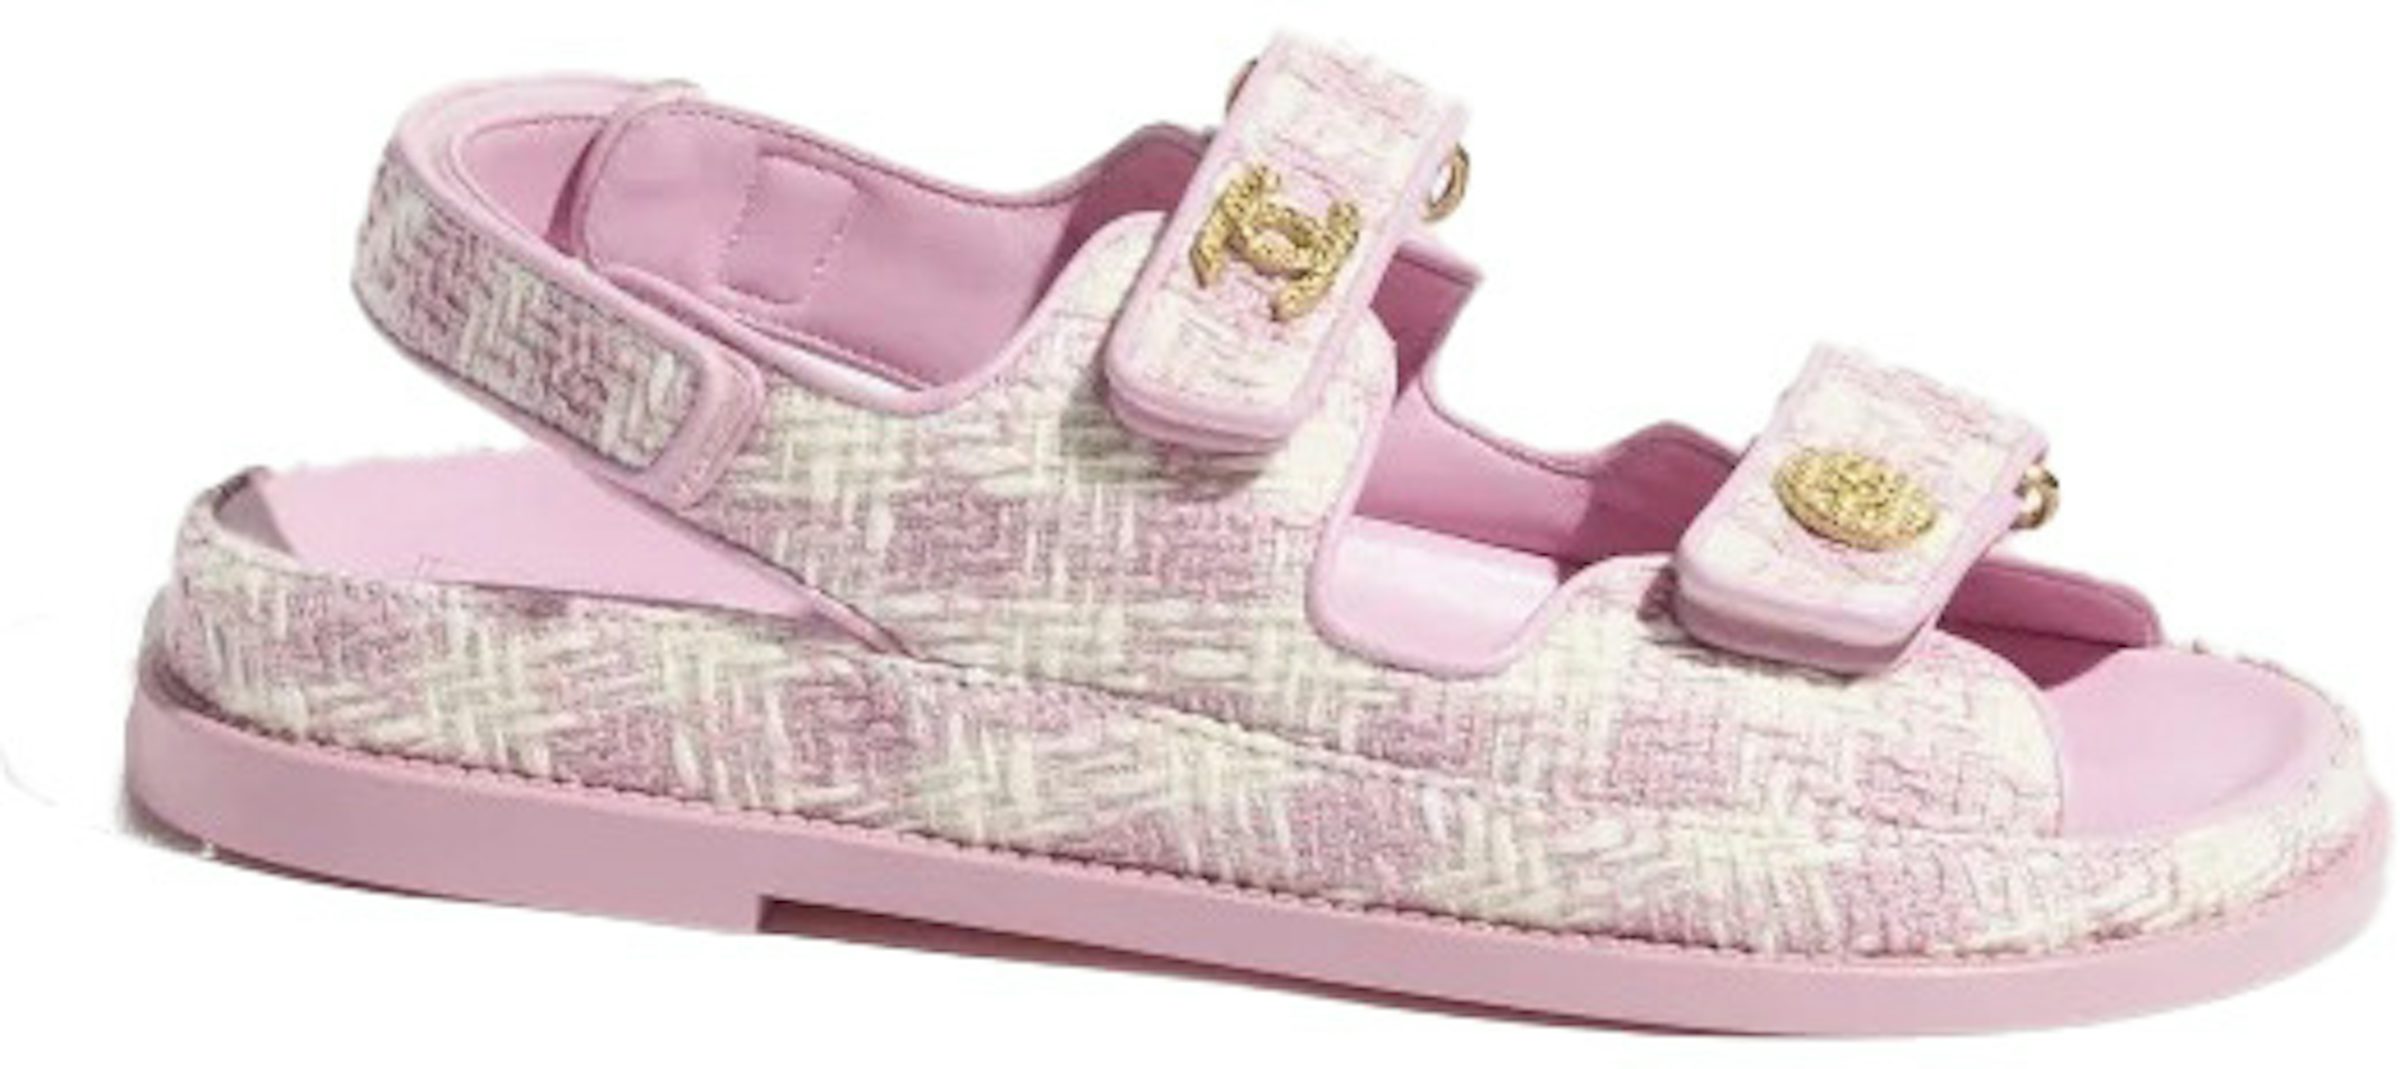 Buy Chanel Slides & Sandals Shoes & New Sneakers - StockX